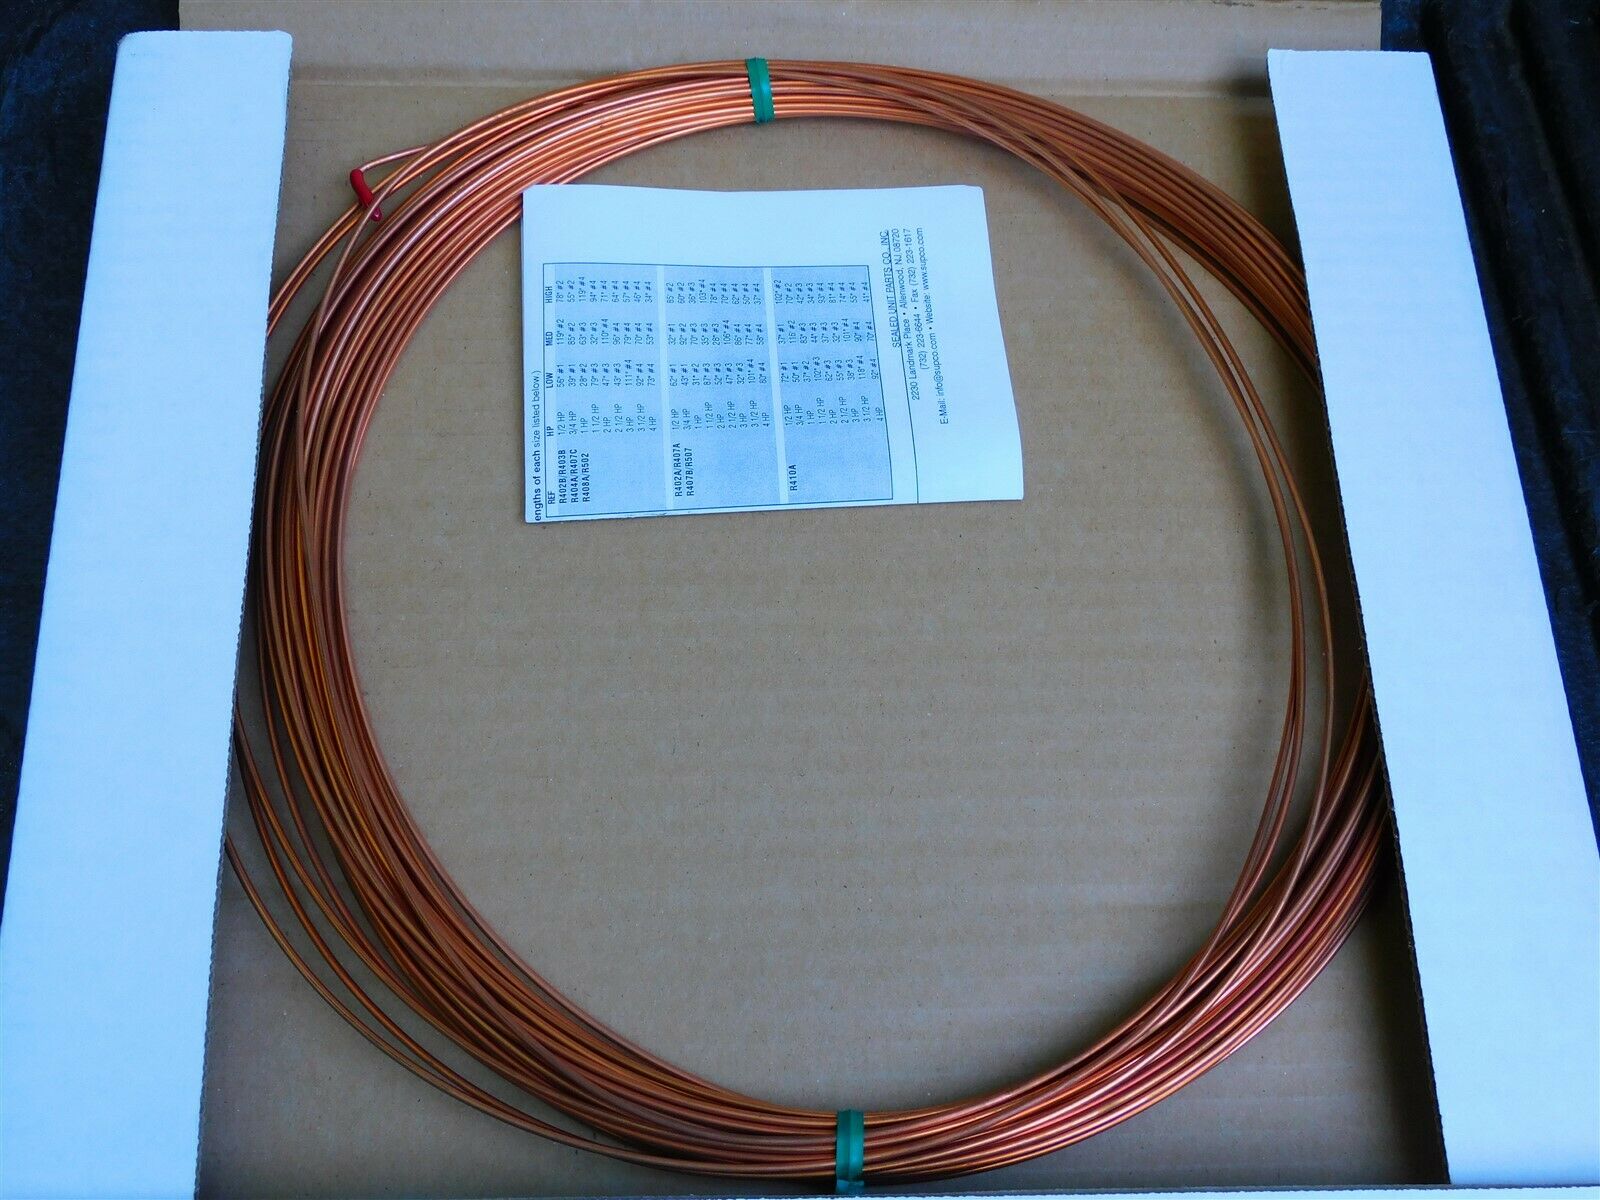 Supco Restricto Capillary Tubing Bc3-100 Refrigeration Hvac Tubing New In Box